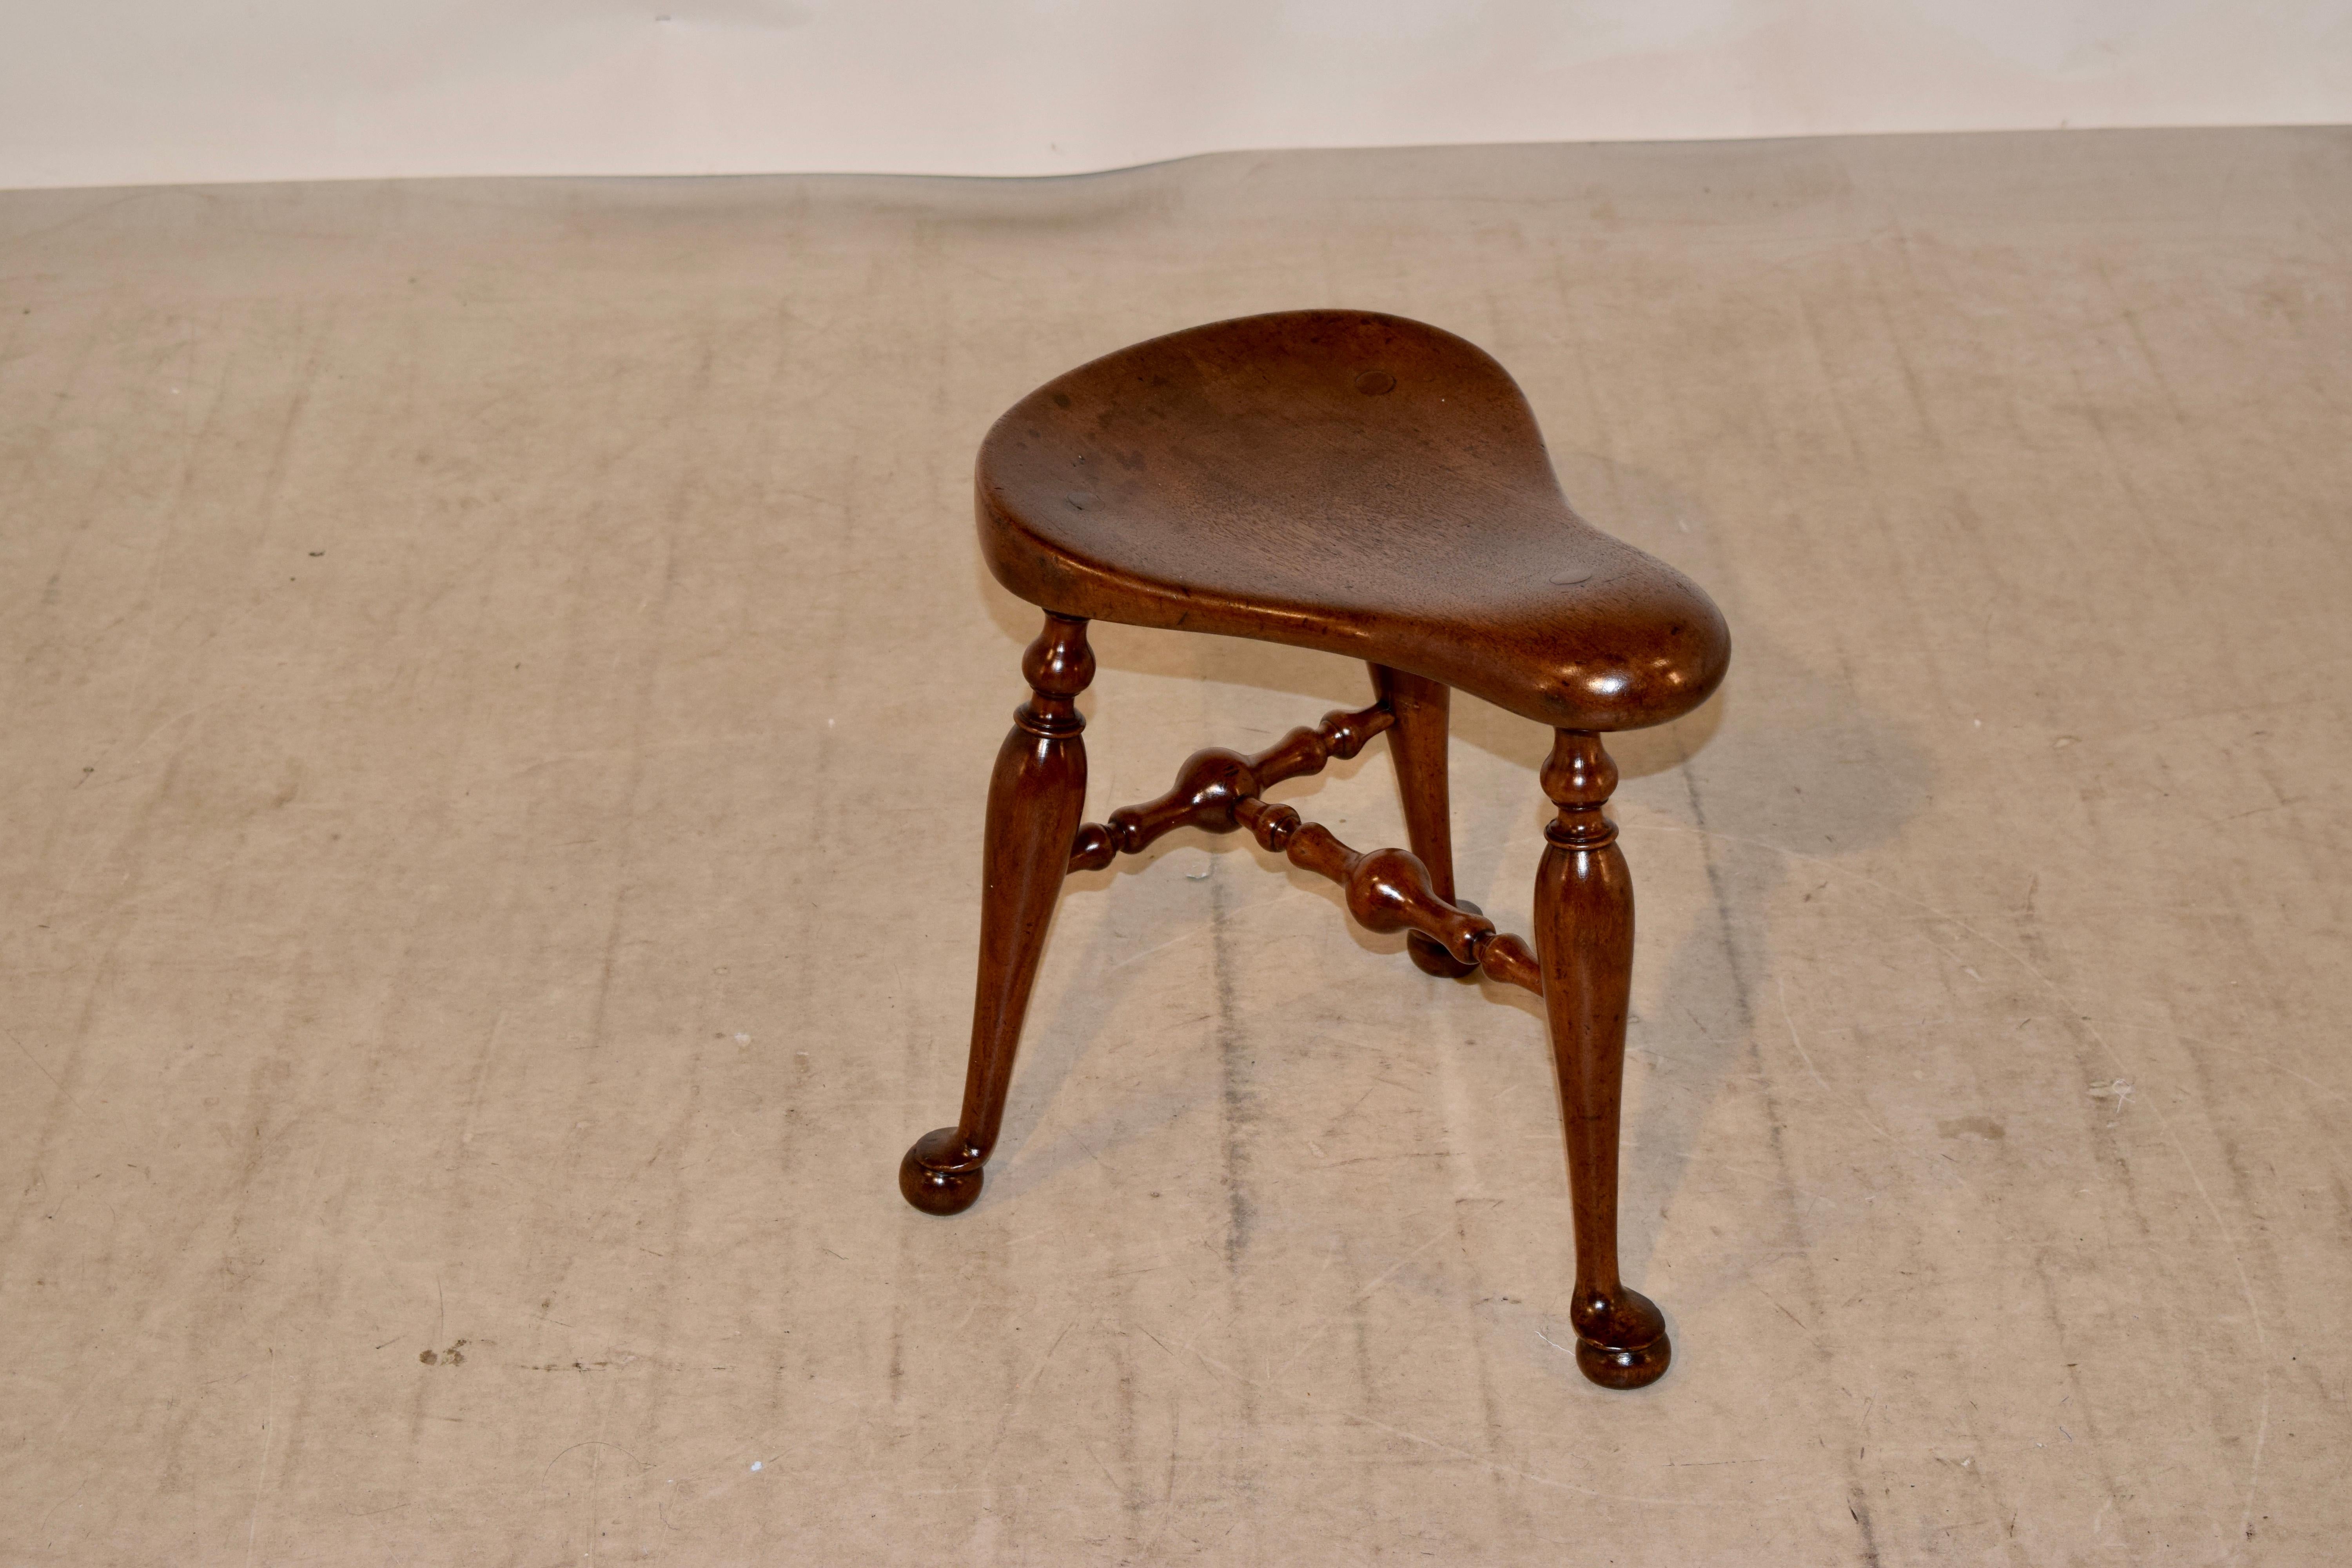 A fine quality late 19th century walnut saddle seat stool from England. This unusual stool has a shaped saddle seat with turned stretchers and terminating with pad and ball feet. Underneath the seat is a stamped registration mark as follows: Reg no: